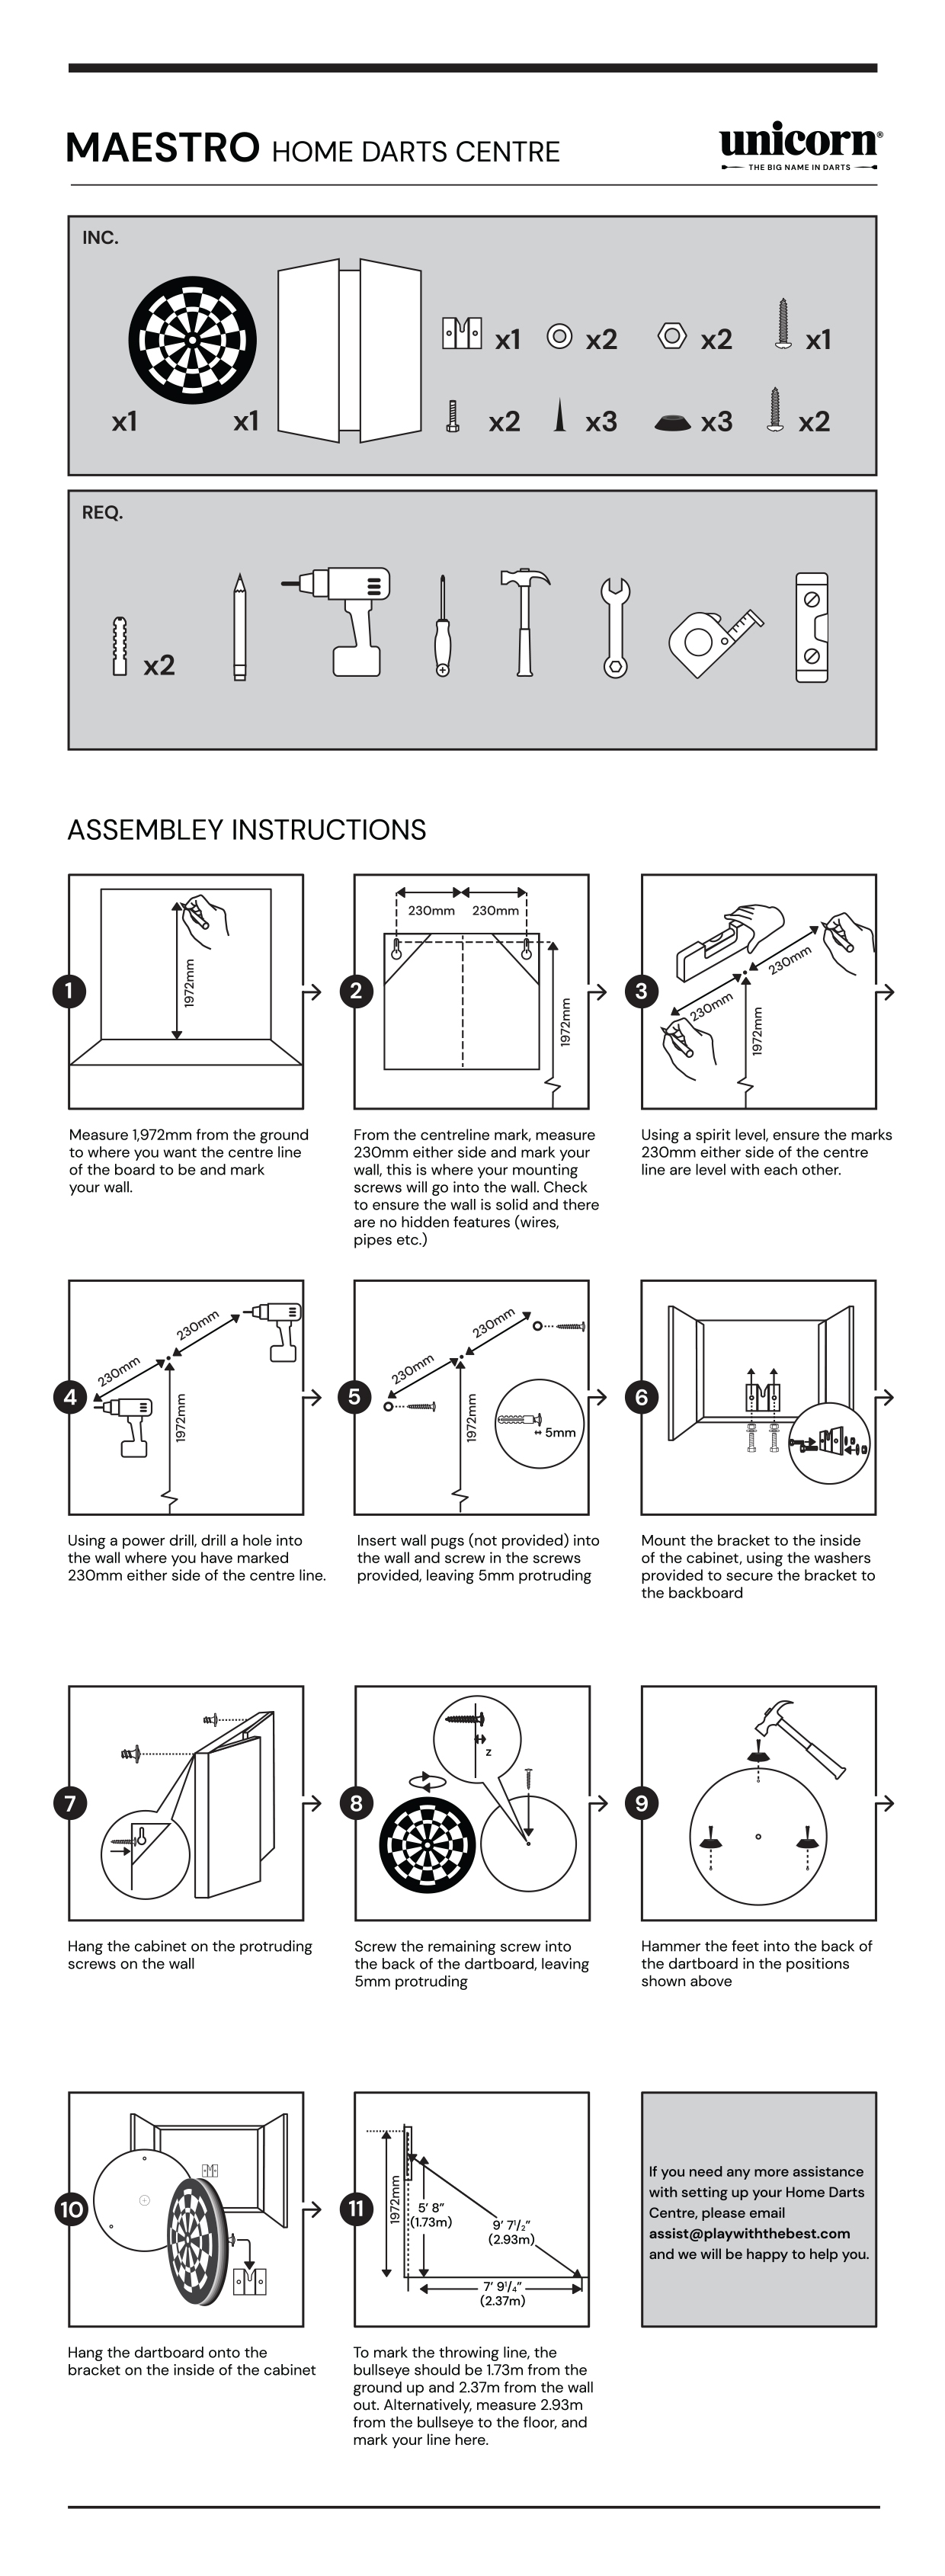 HDC and Cabinet Hanging Instructions